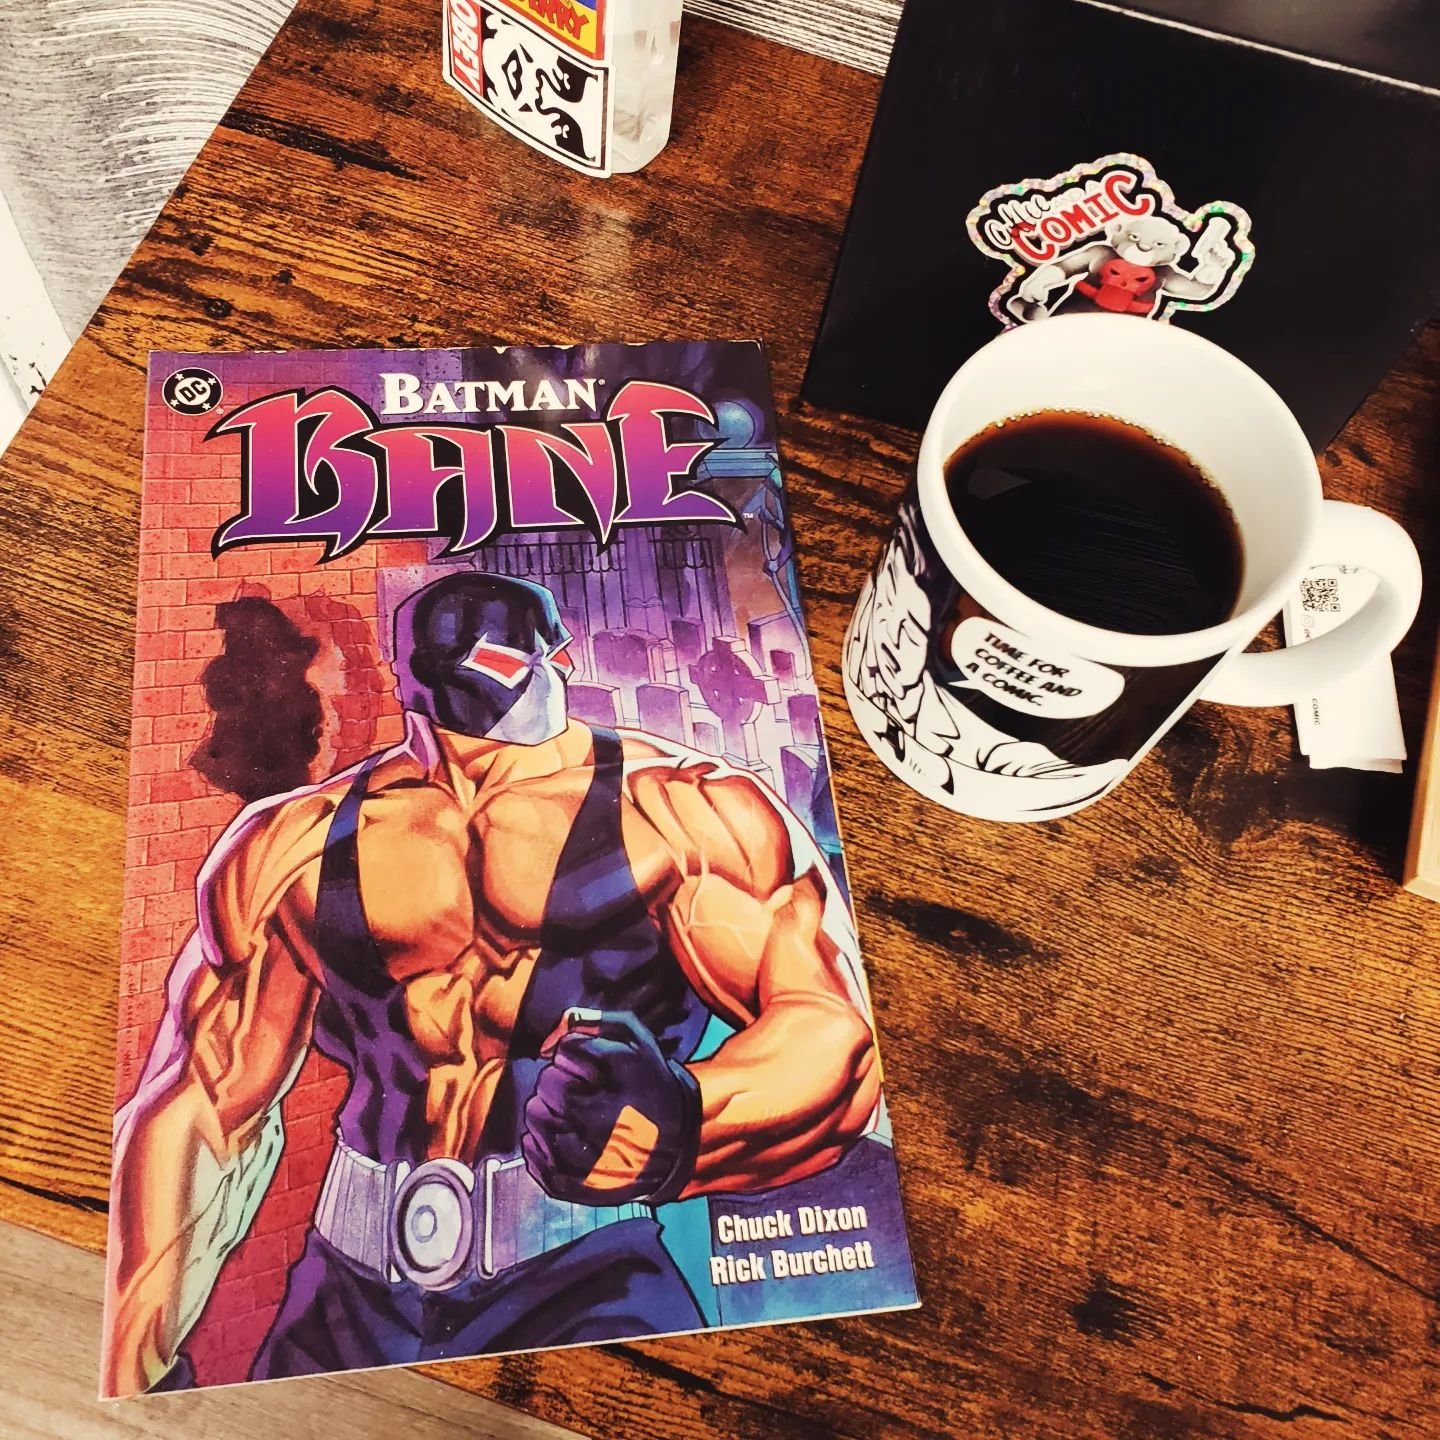 Today's Coffee ☕ and a Comic 📖 is Batman BANE, a prestige one-shot, Bane, the infamous breaker of Batman's back, returns to Gotham City with nuclear weapons in tow. Crafted by Chuck Dixon and illustrated by Rick Burchett, this tale promises high-oct